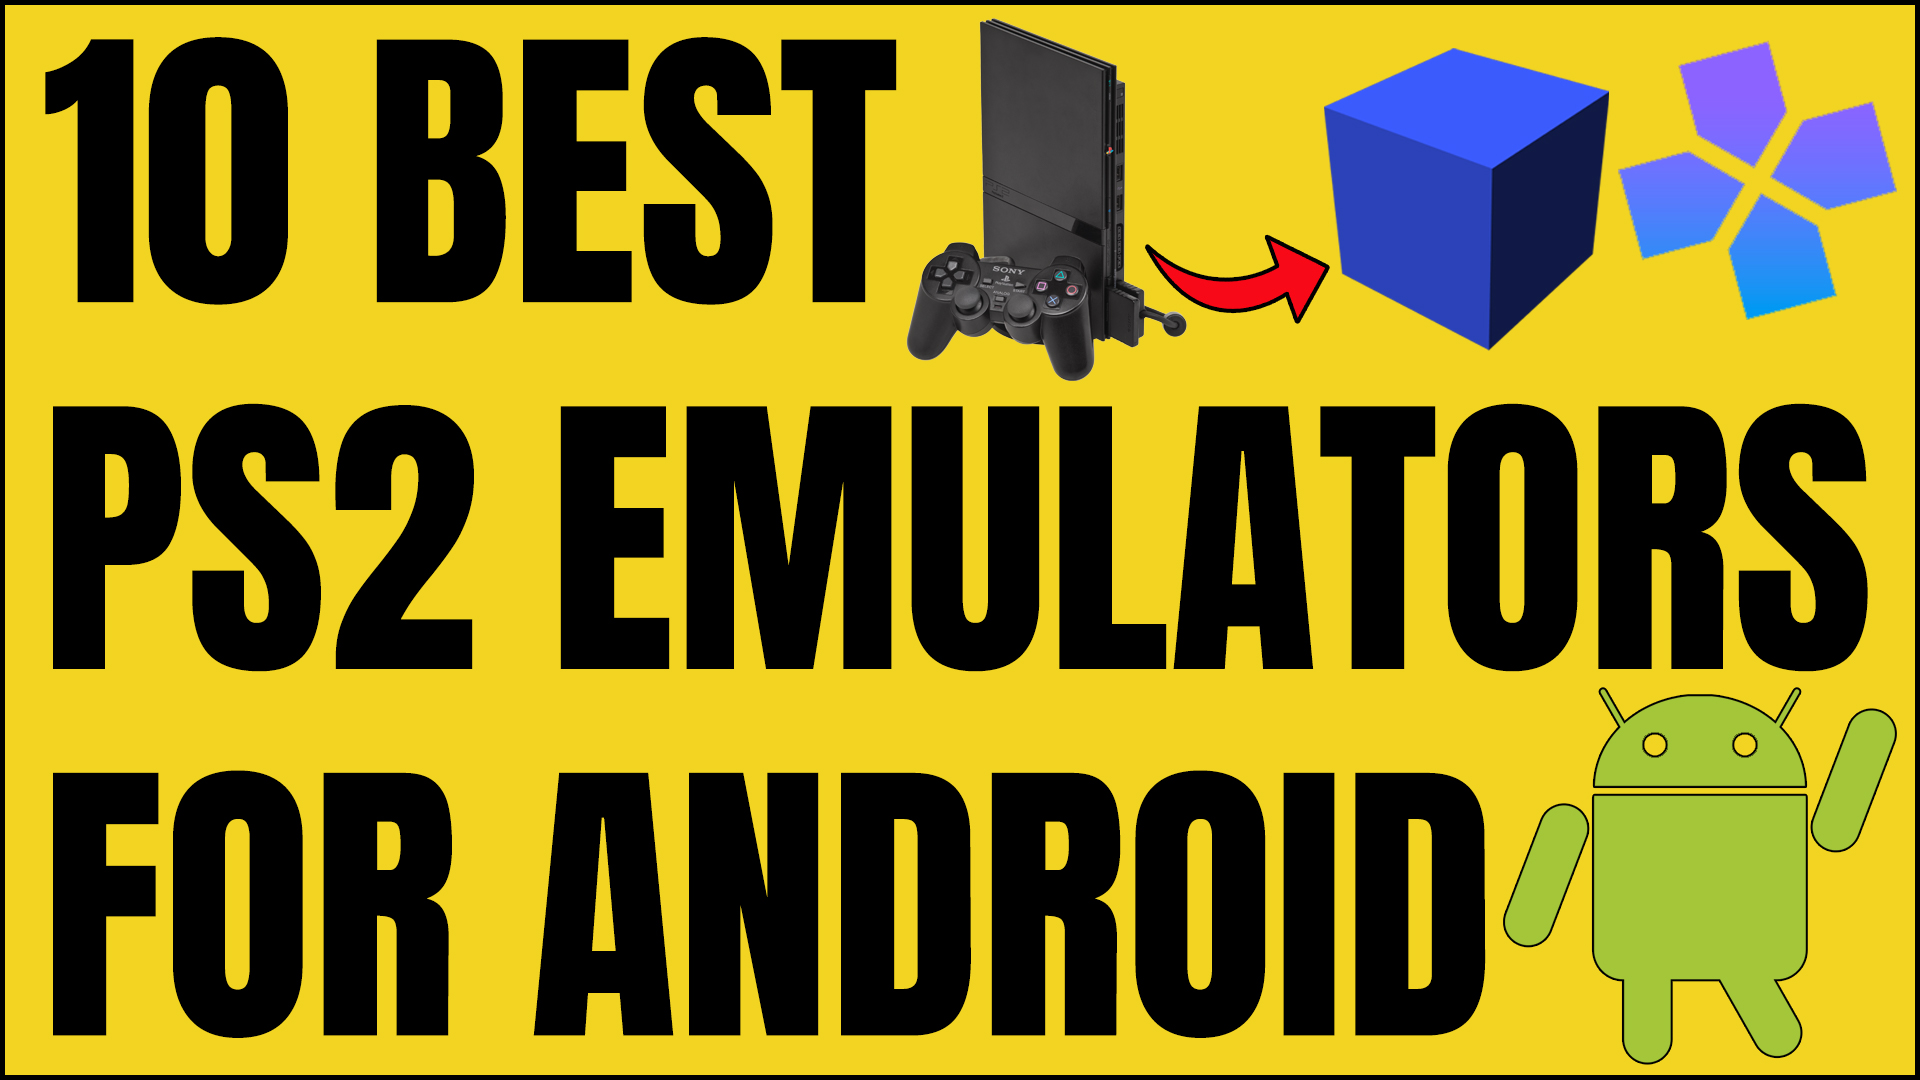 10 Best PS2 Emulators For Android